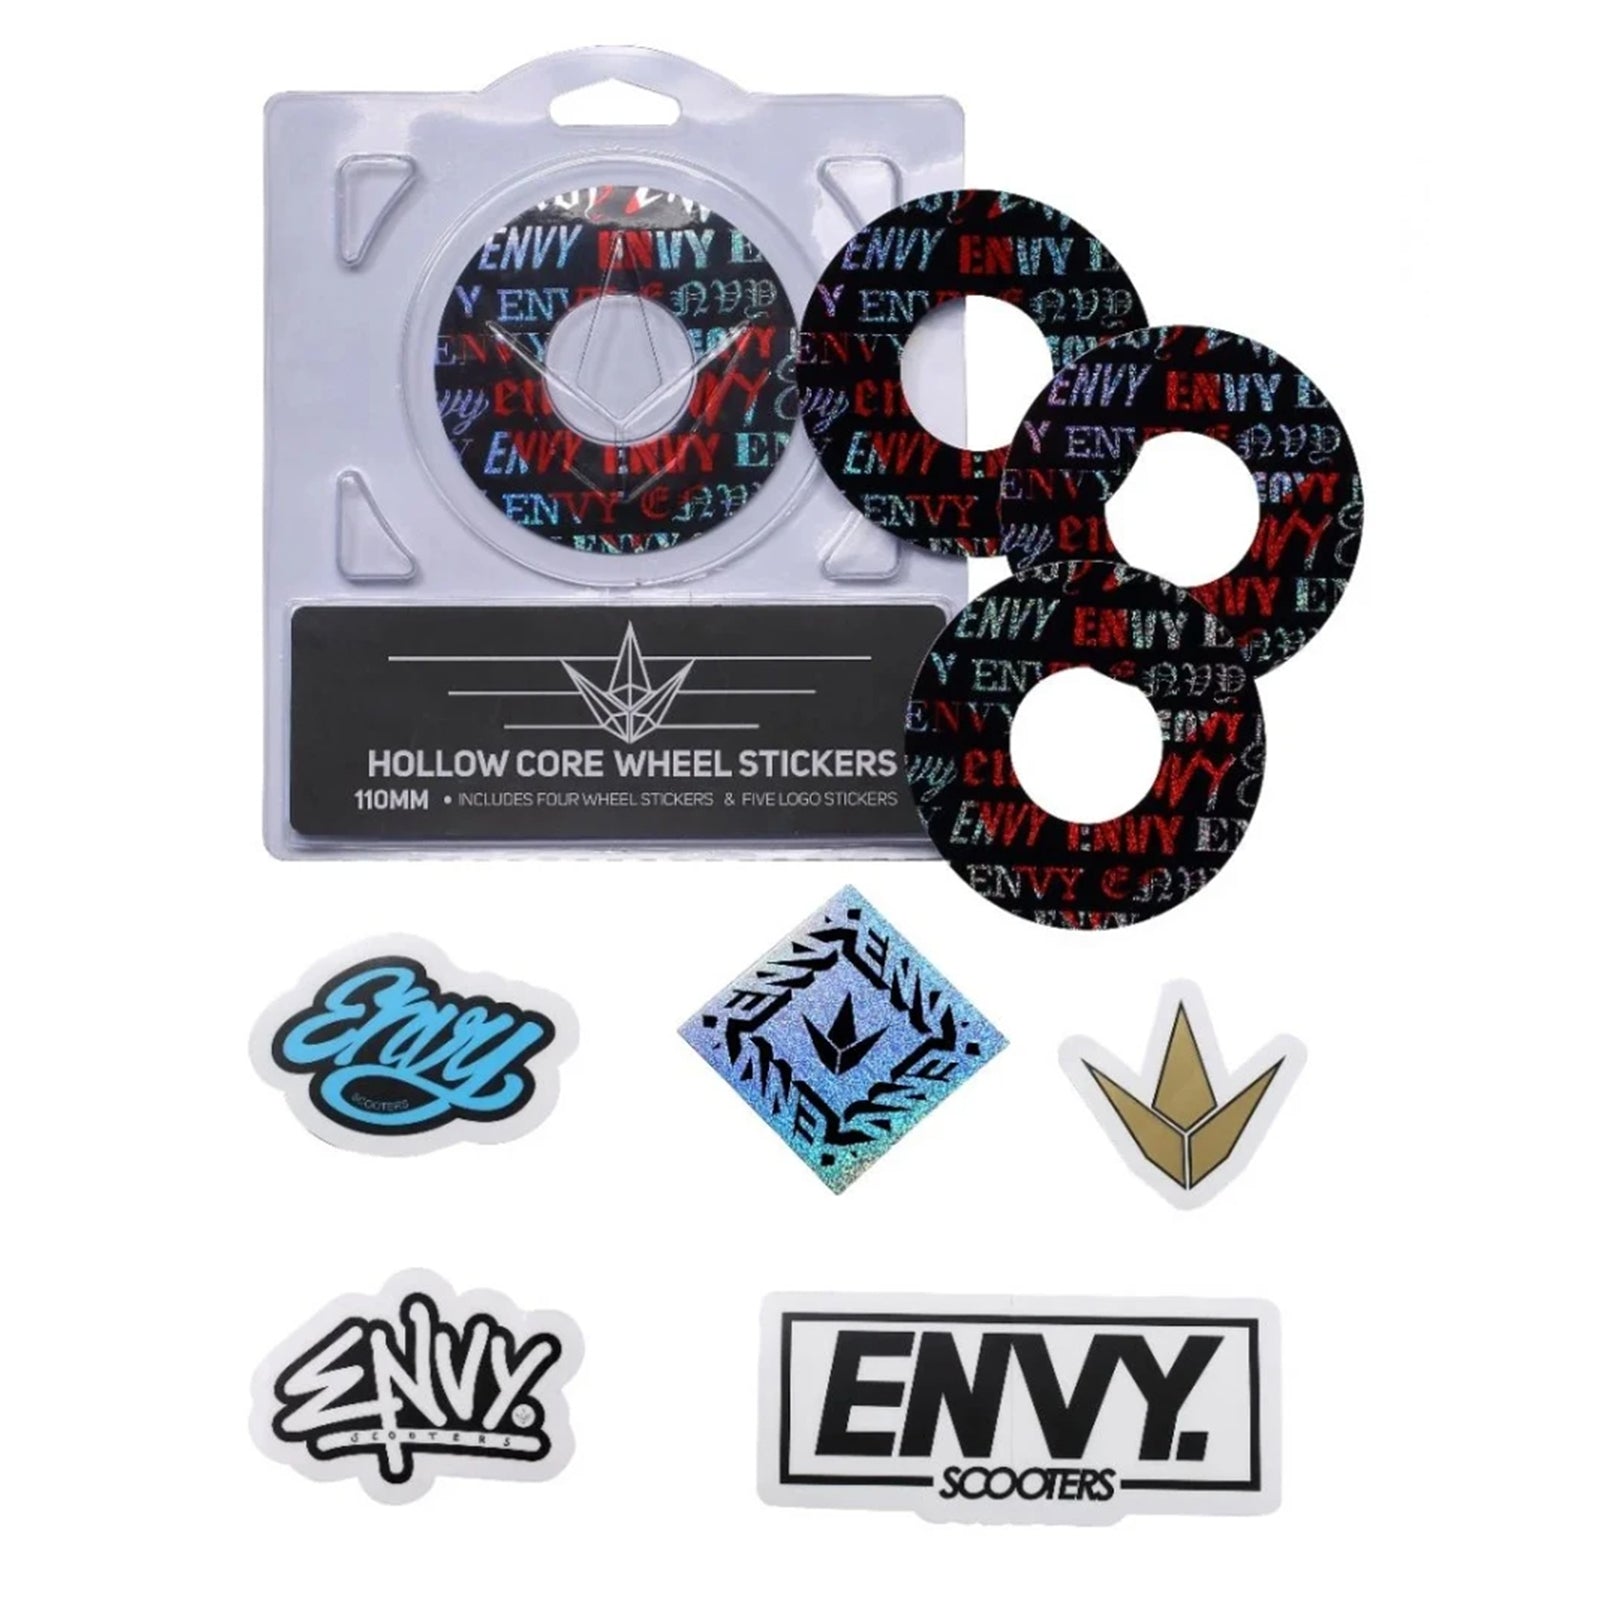 Envy Hollow Core Wheel Stickers, 120mm Wheel Stickers (Various Designs)